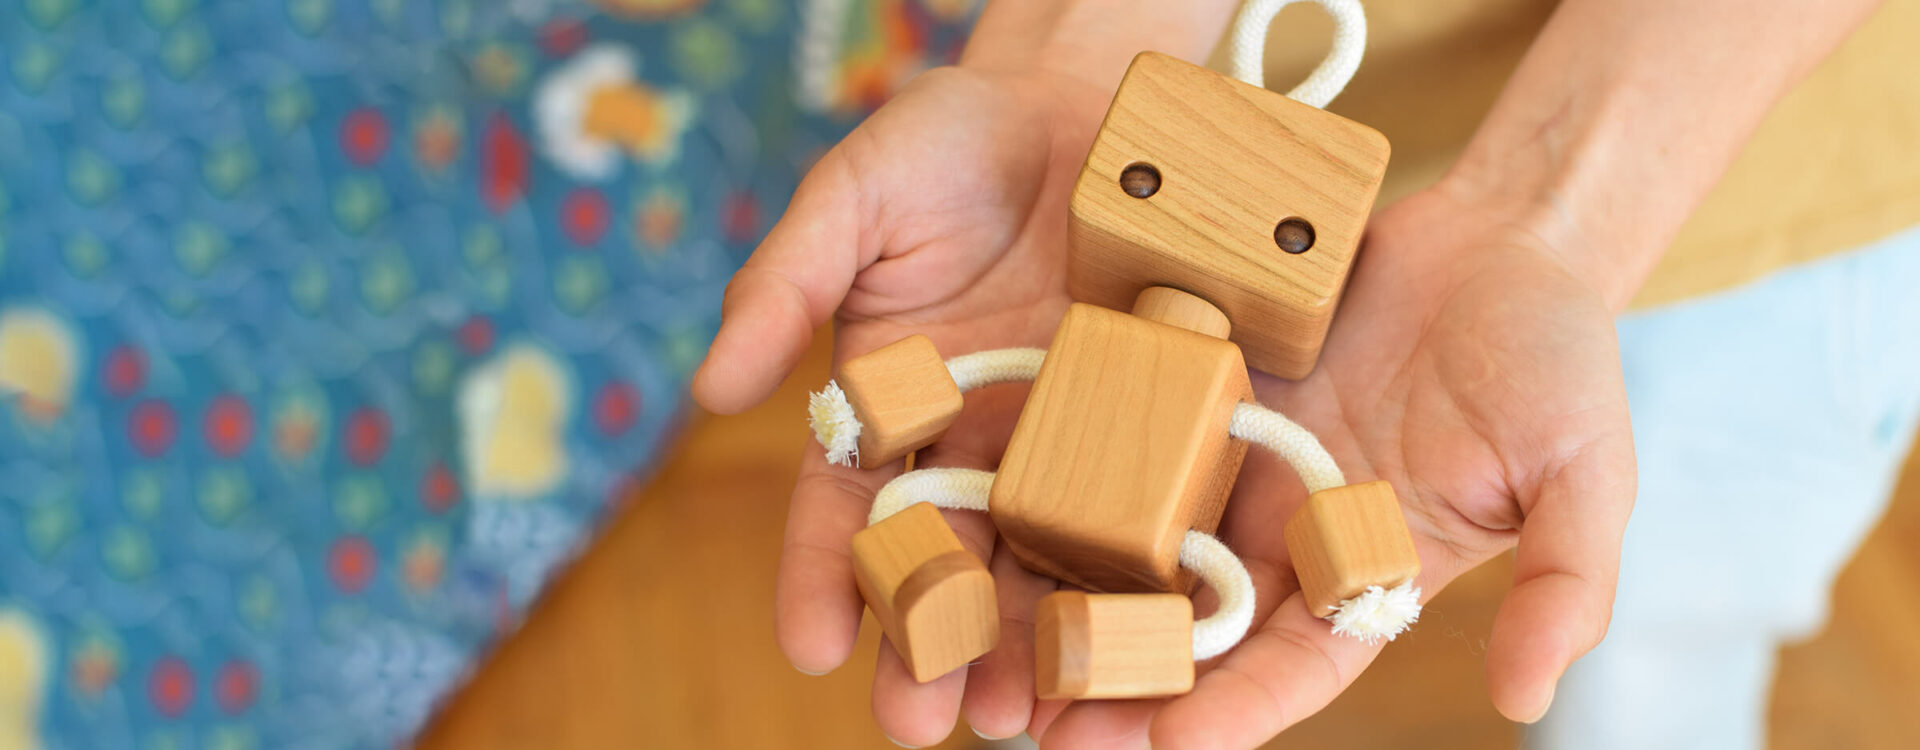 Hands carring wooden robot toy